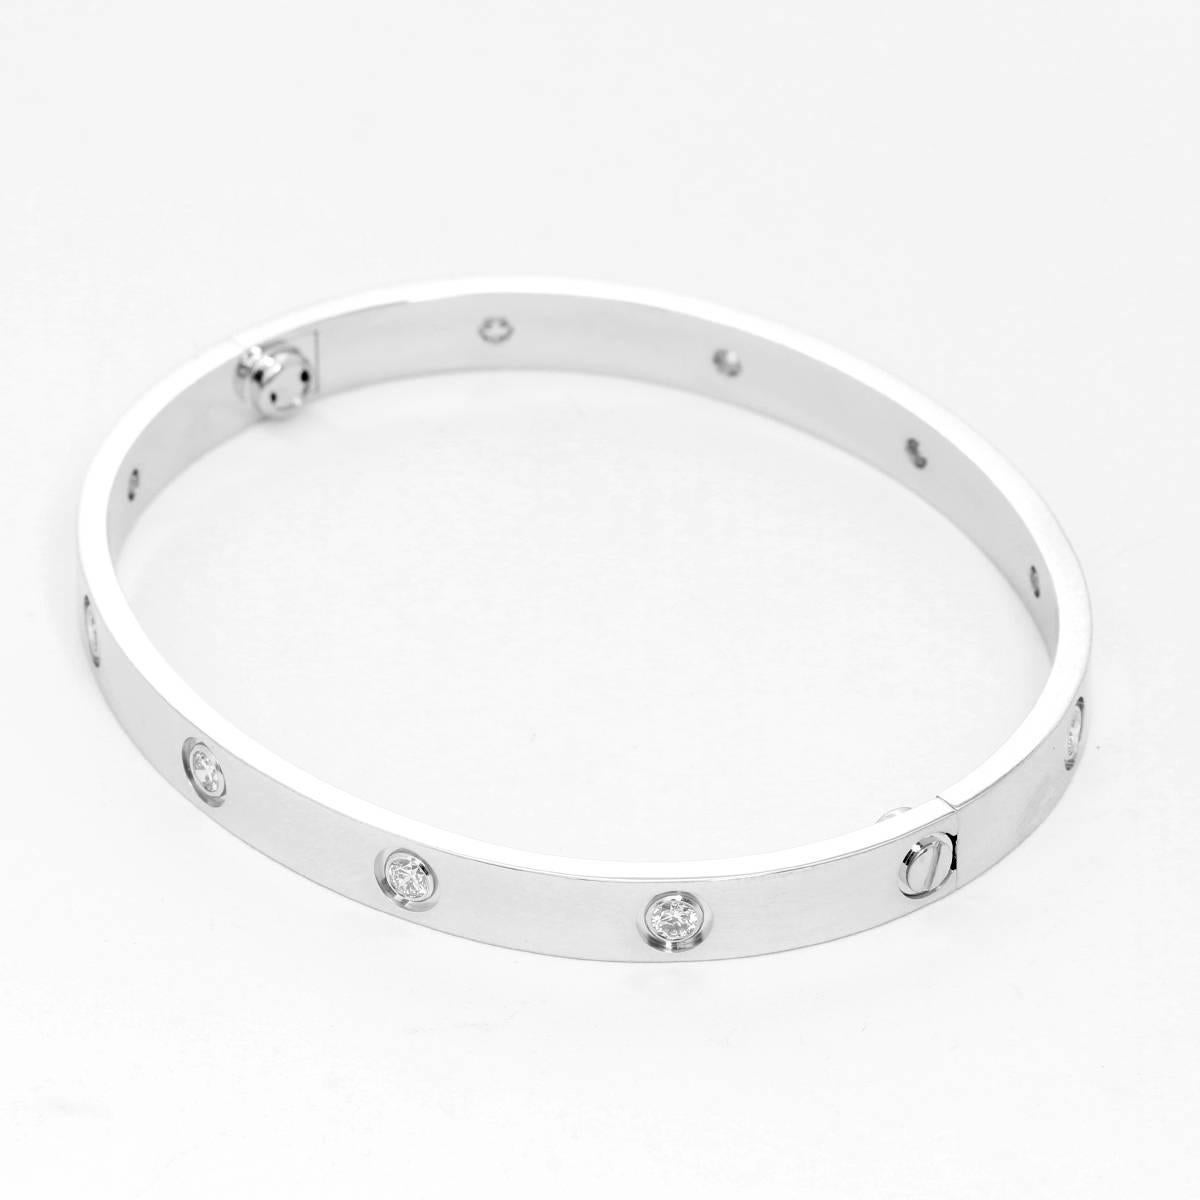 Cartier 18K White Gold Diamond Love Bracelet size 19 - . 18K White Gold set with 10 brilliant-cut diamonds totaling .96 cts. Hallmarks CARTIER, AWZ531, AU705. New screw system which makes taking it off much easier. Pre-owned with Cartier box and